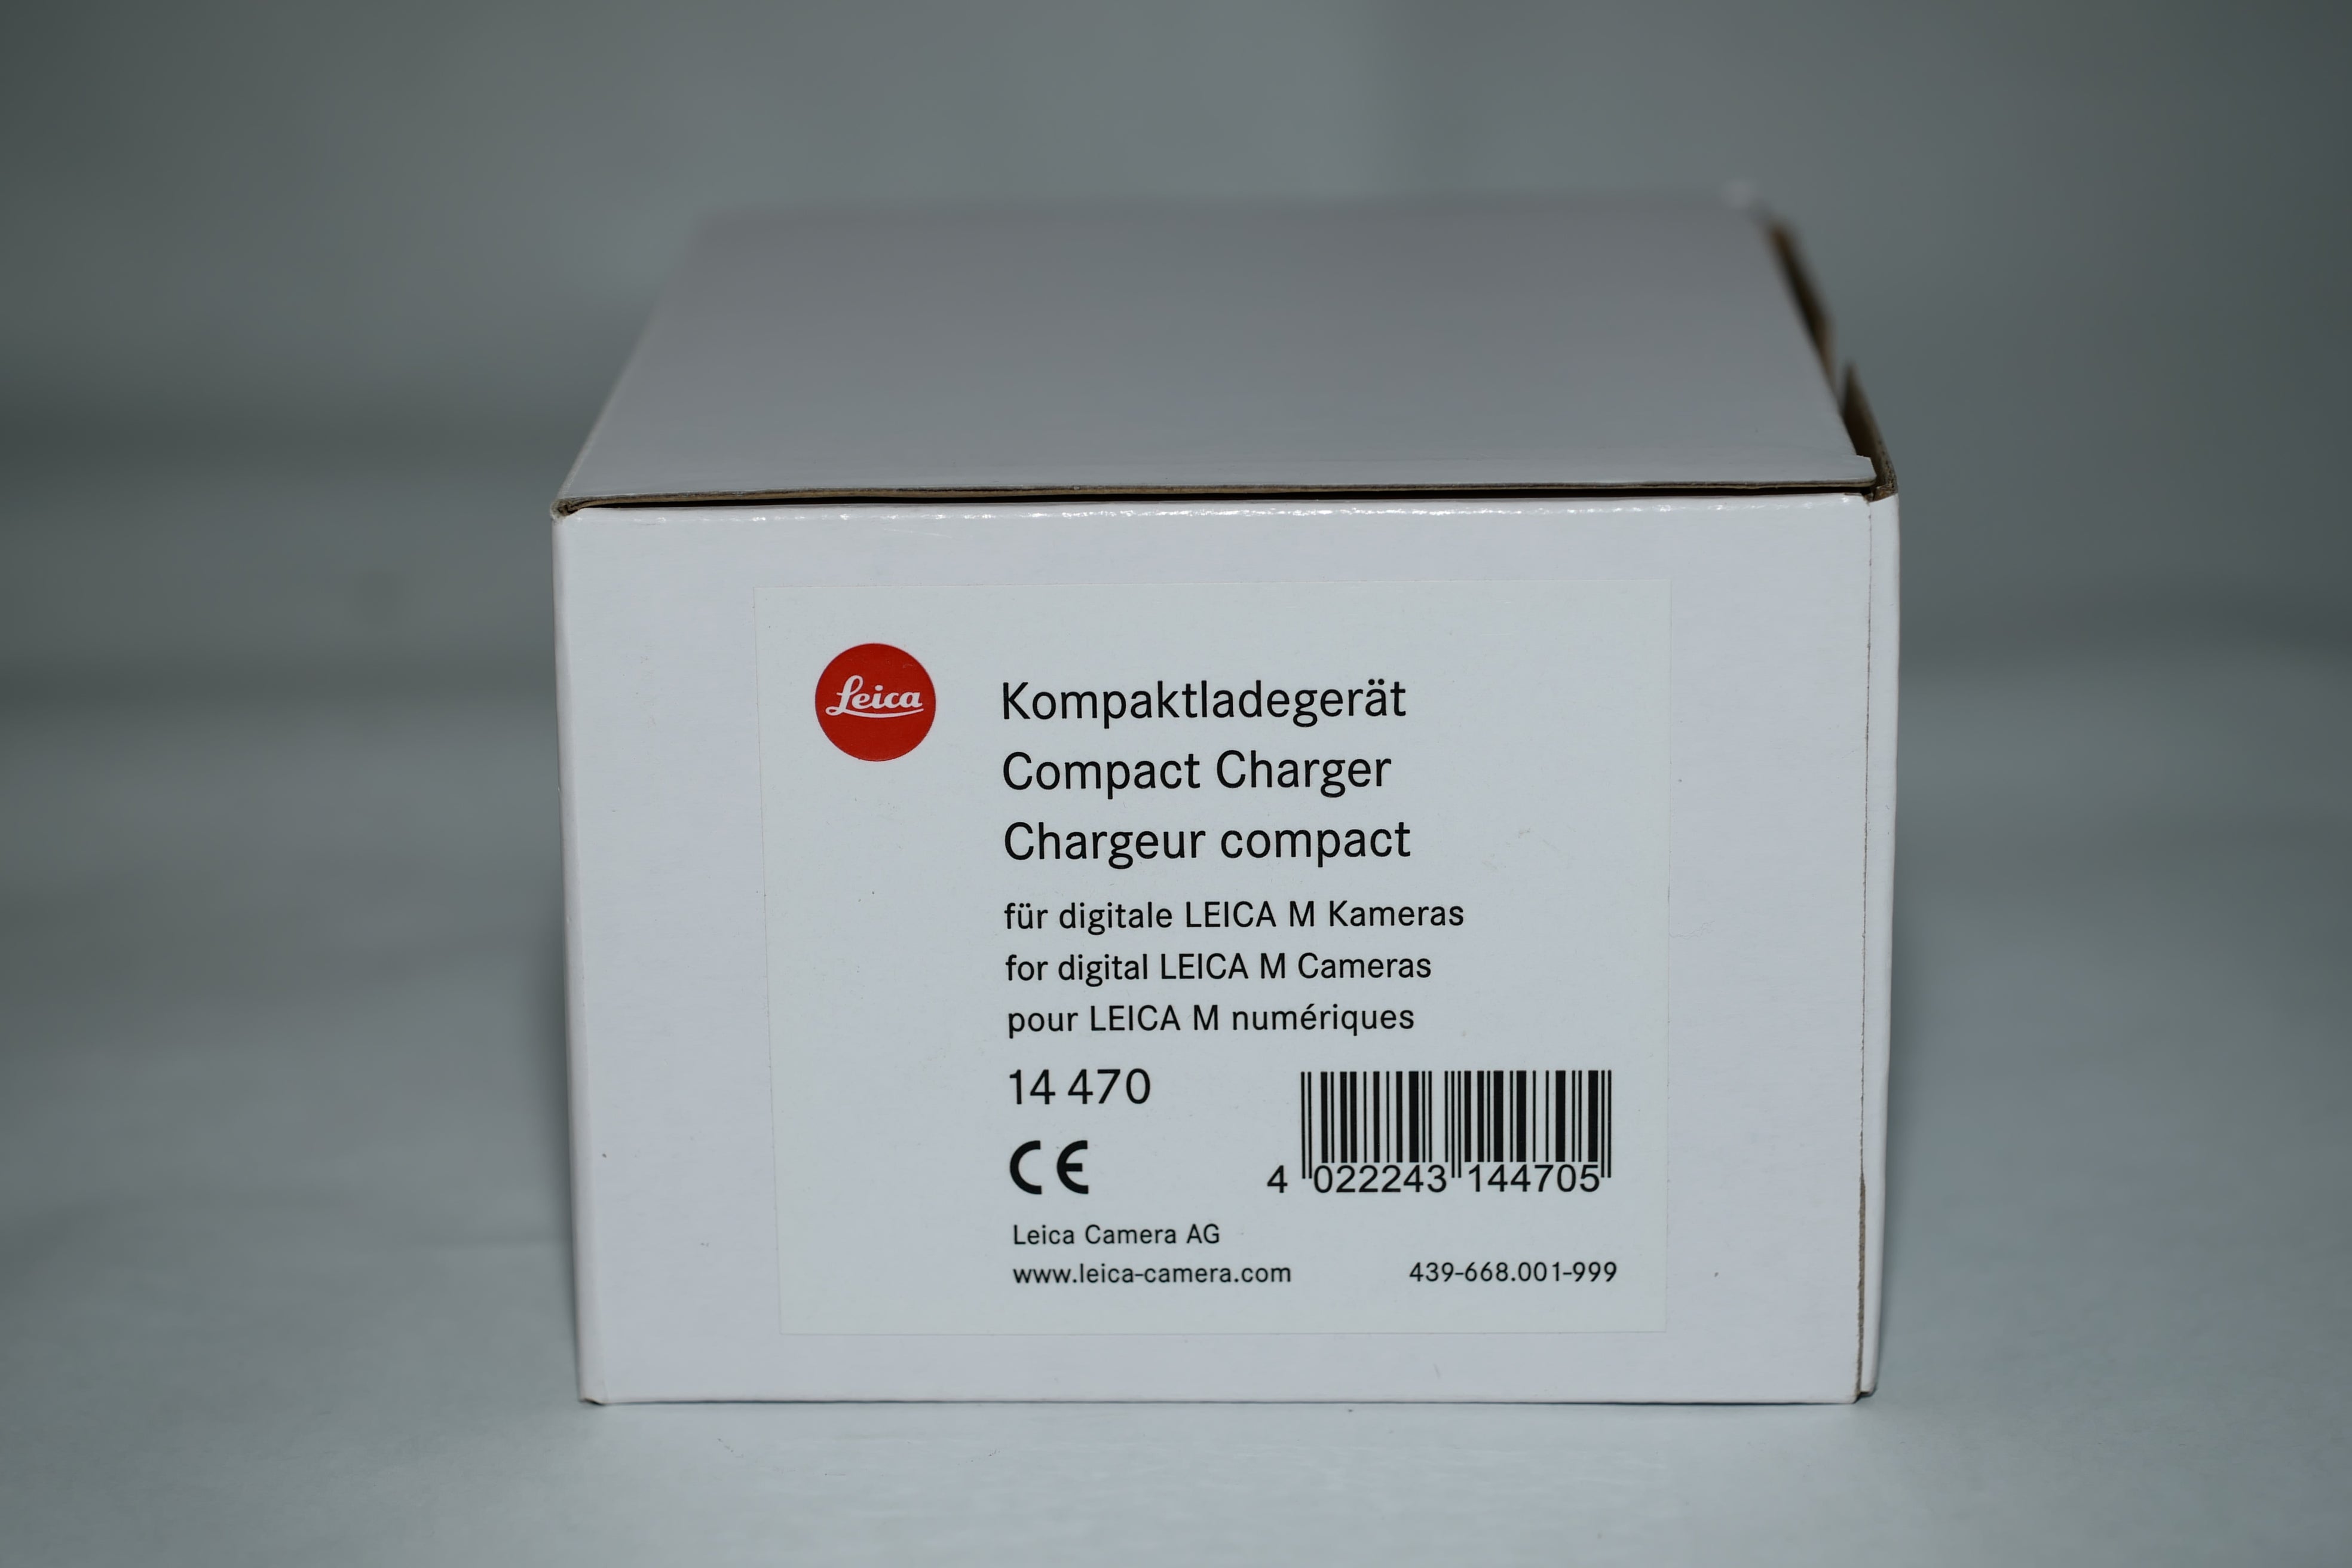 Pre-Owned Leica Compact Charger for Digital Leica M Models